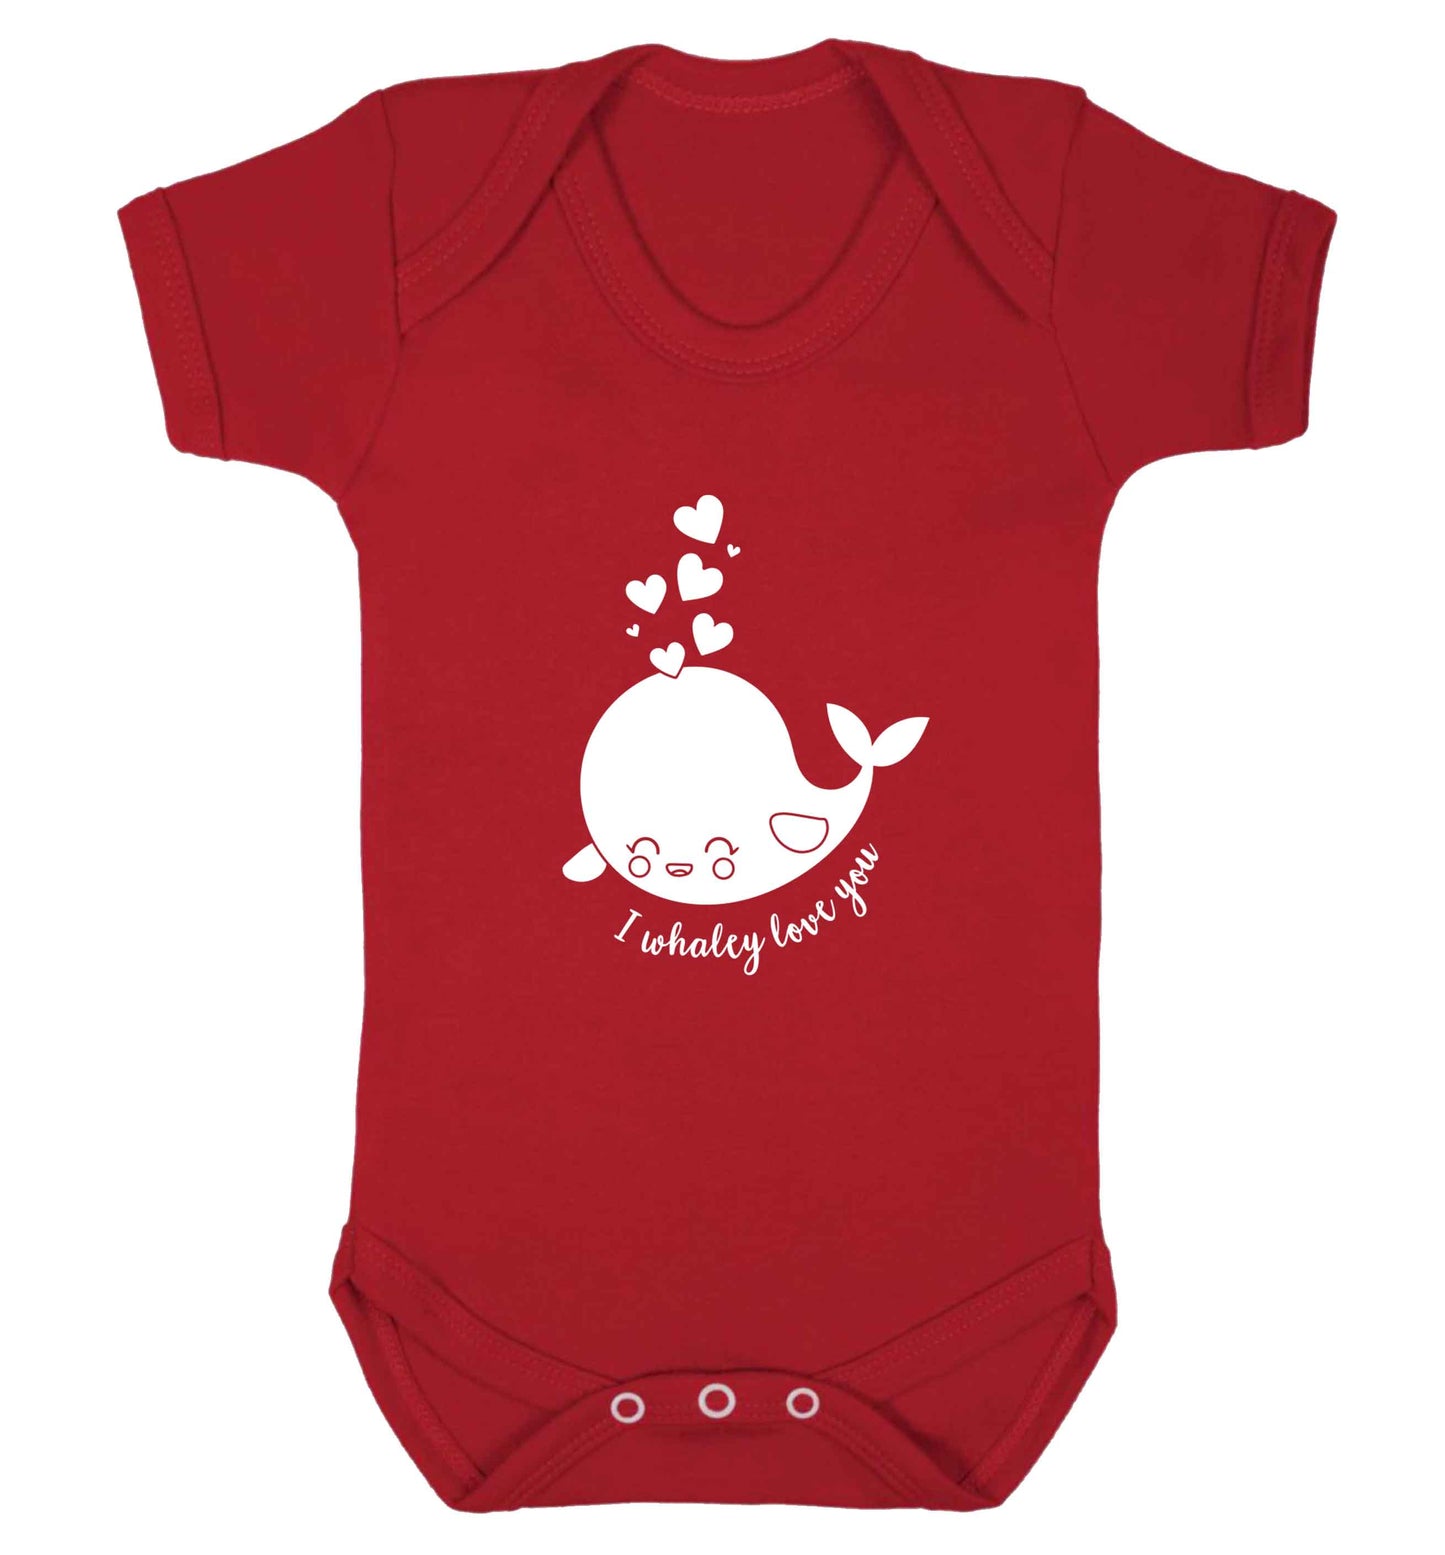 I whaley love you baby vest red 18-24 months